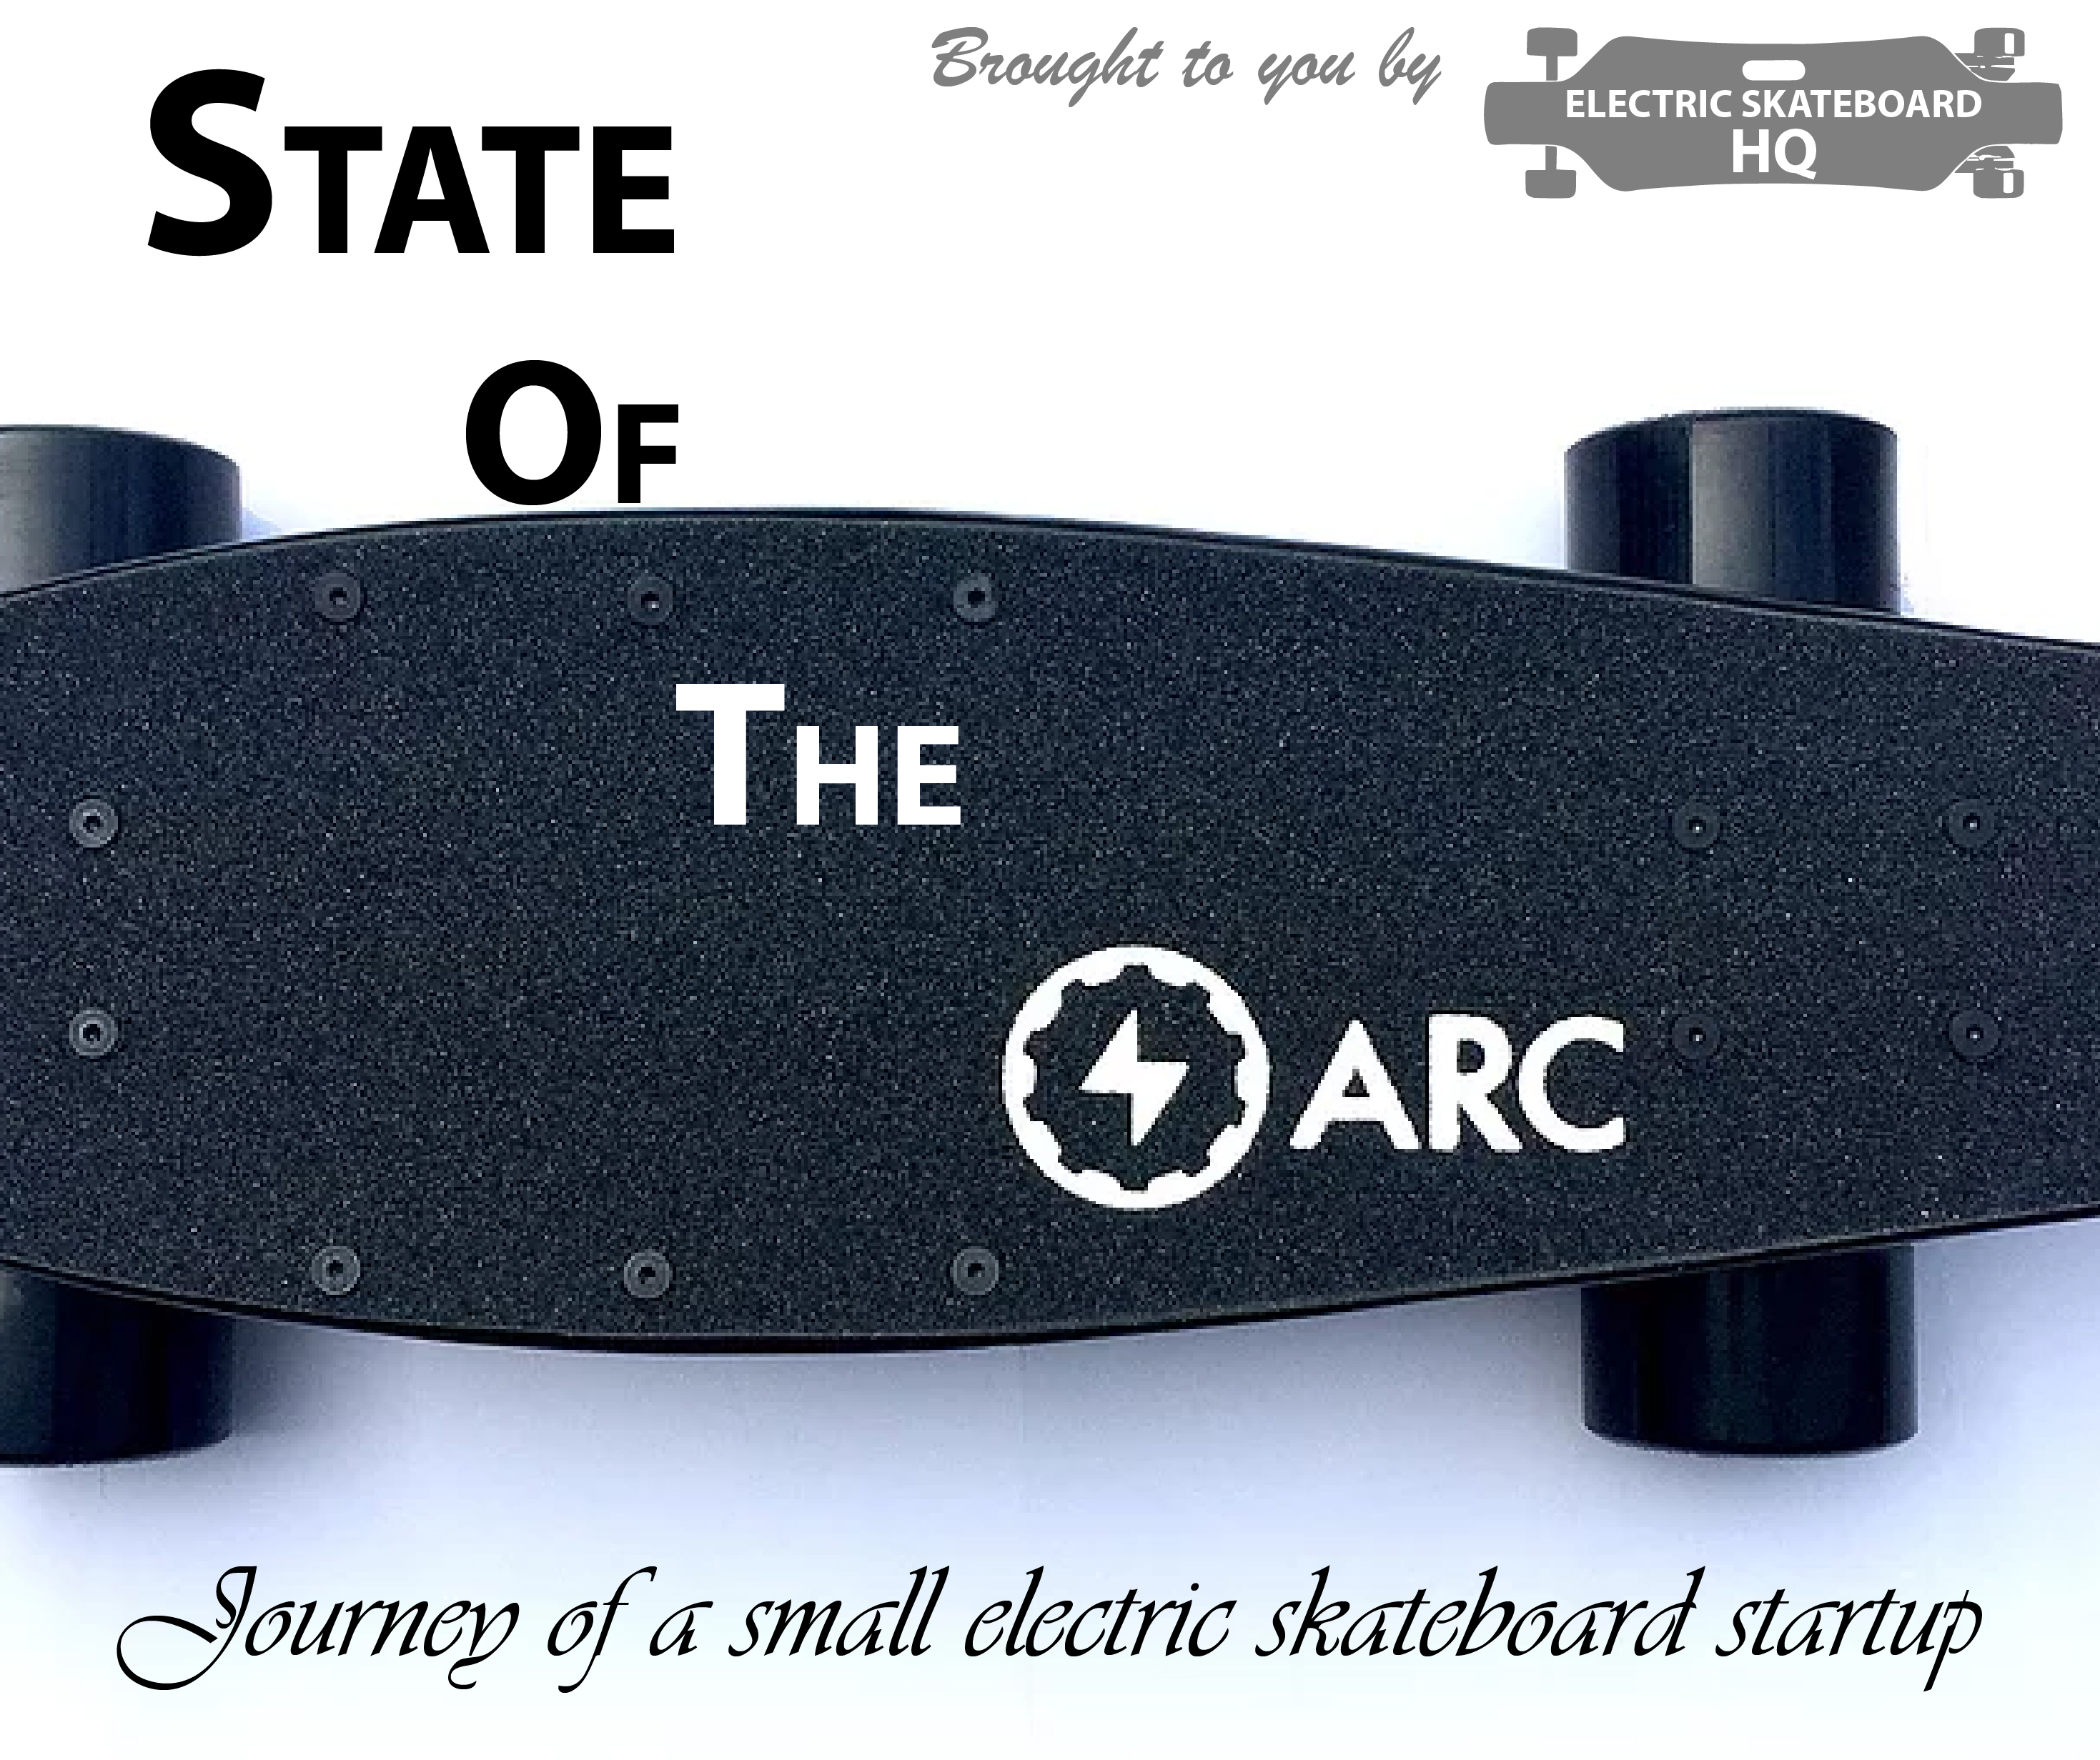 State of the Arc – The story of the Arc Team